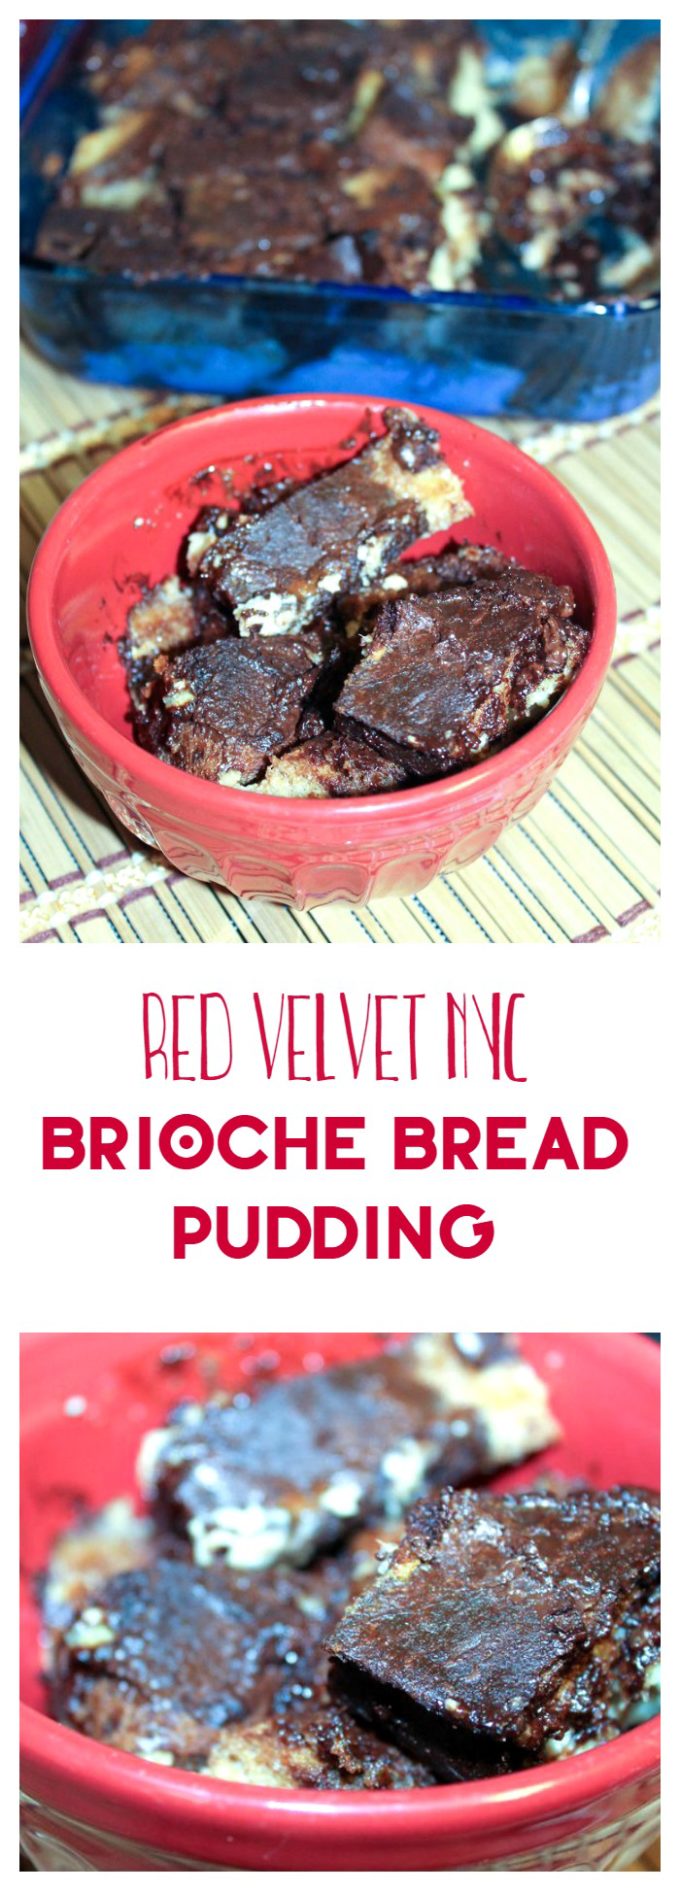 Brioche Bread Pudding Made Easy with Red Velvet NYC